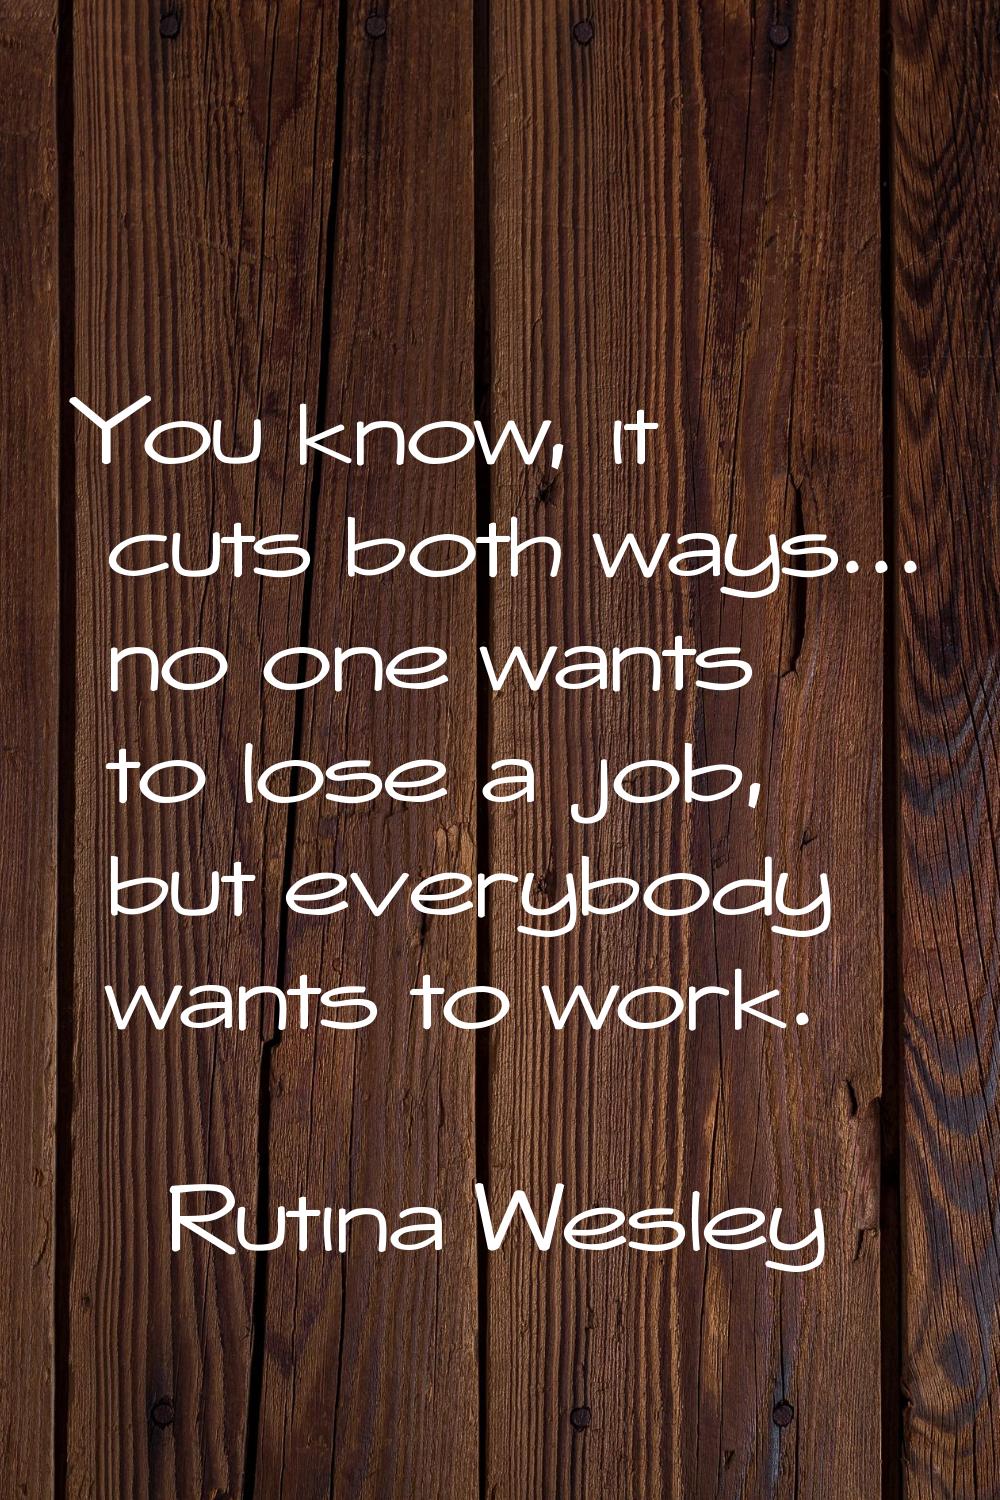 You know, it cuts both ways... no one wants to lose a job, but everybody wants to work.